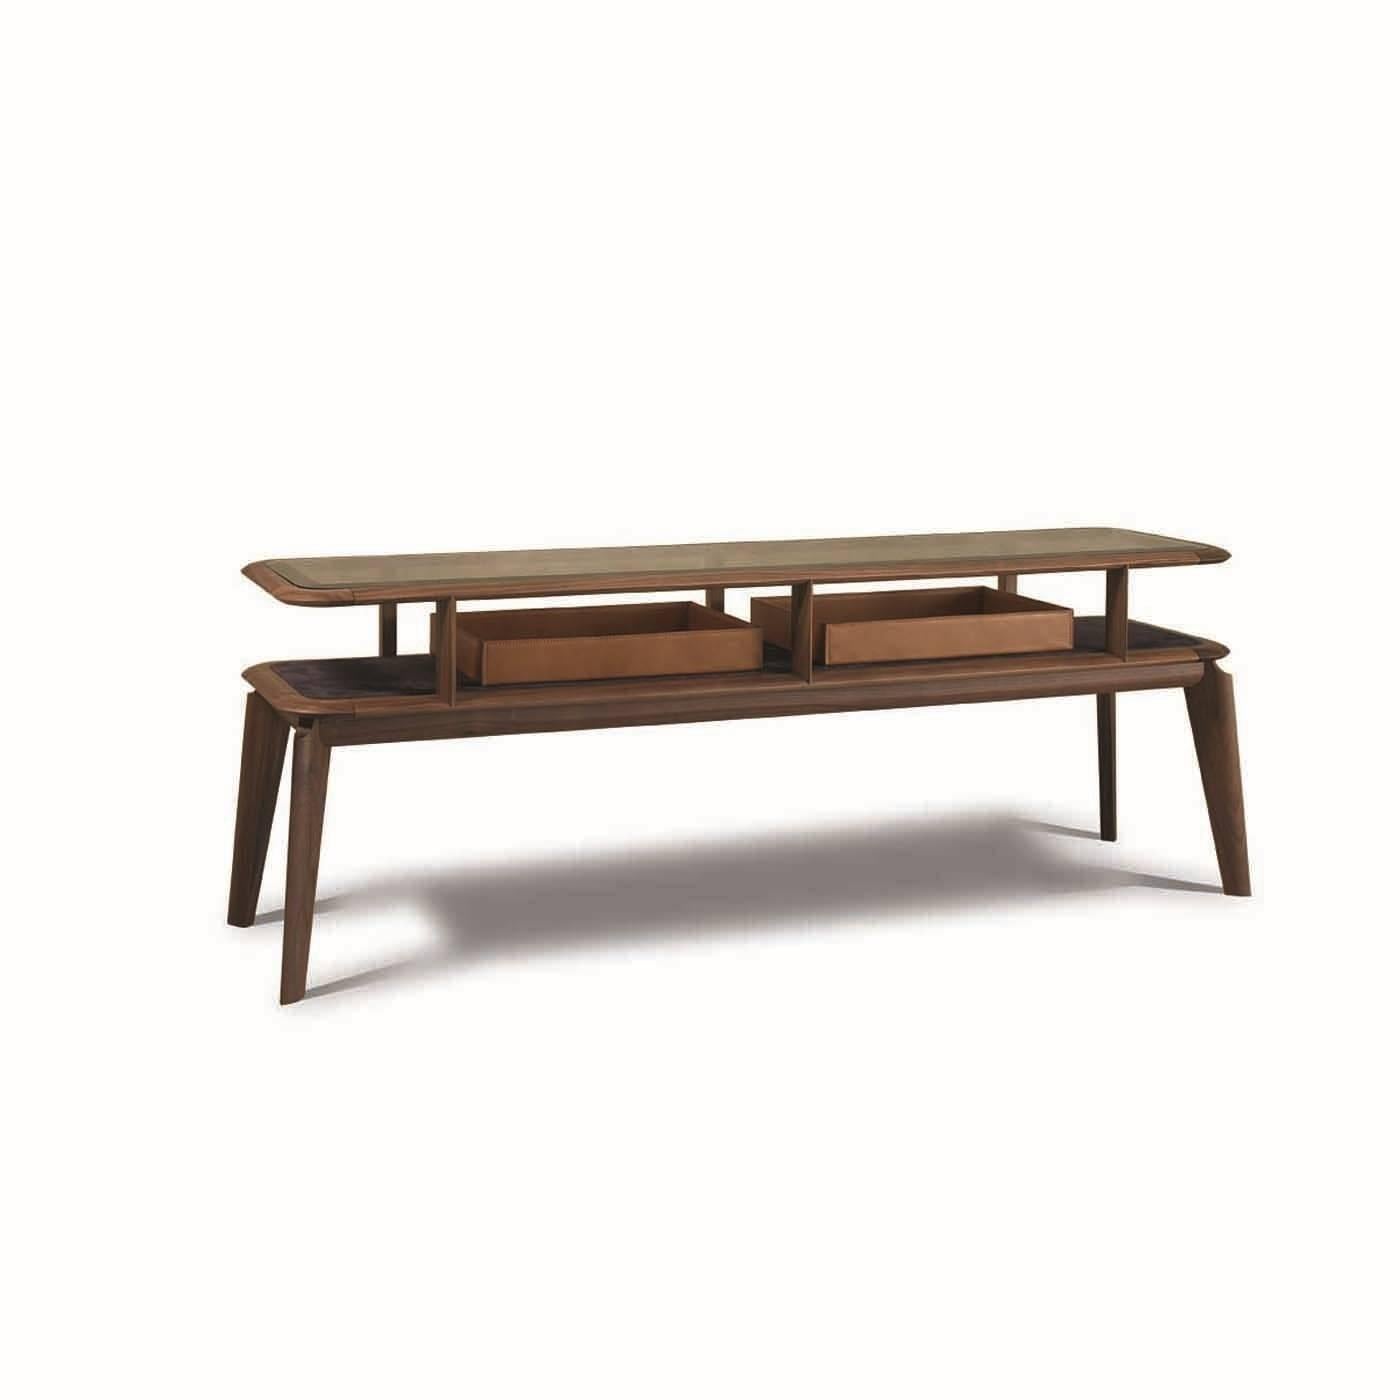 This contemporary console features a structure in solid American walnut wood supporting a rectangular top in bronzed glass, with the use of six short elements that separates it from the bottom shelf that is upholstered in fine leather. In between